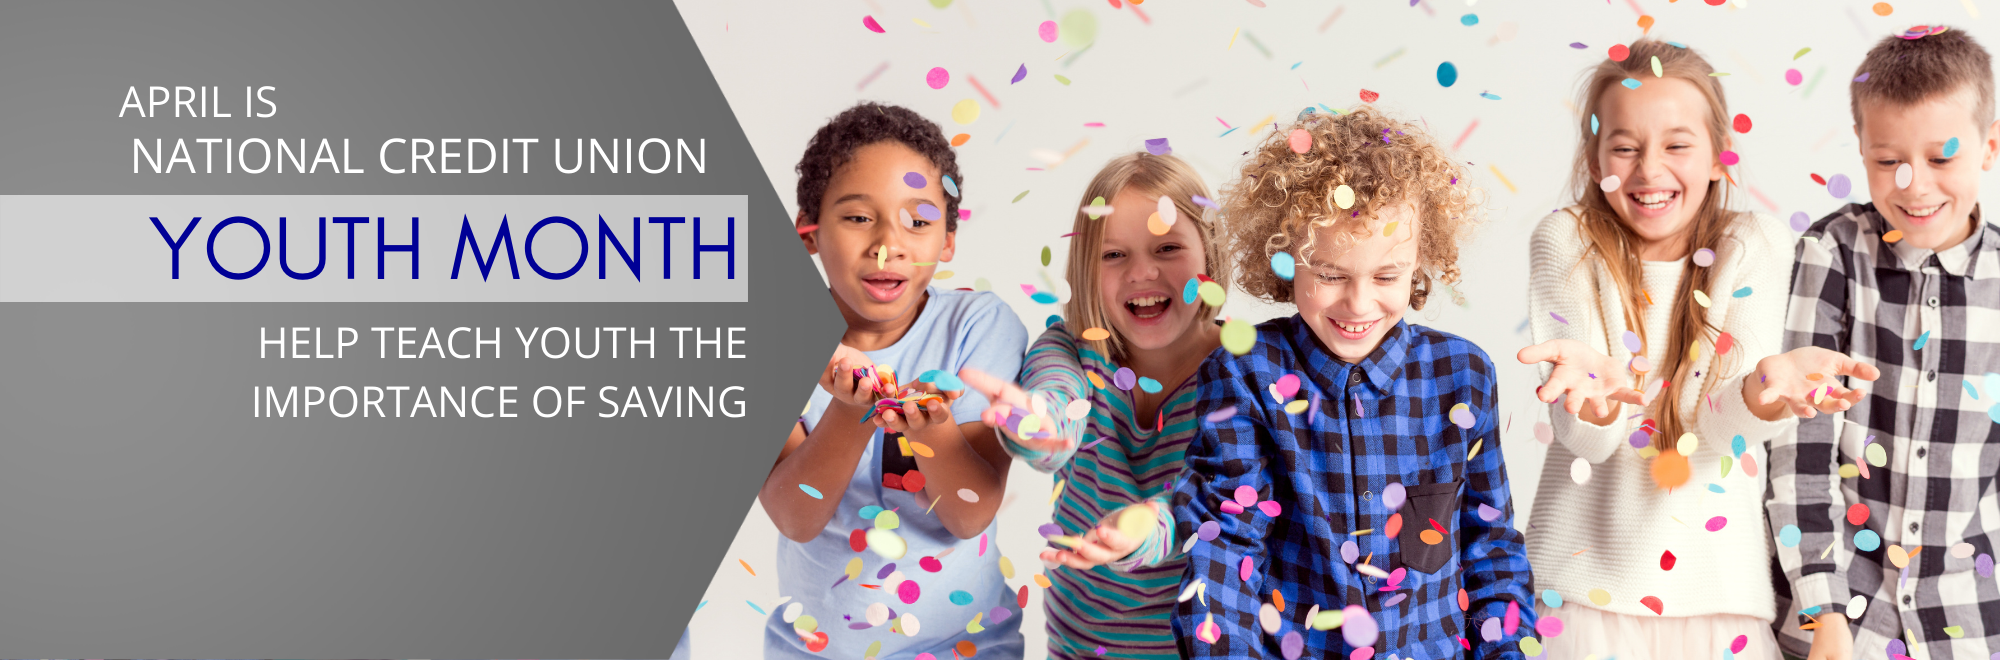 April is National Credit Union Youth Month. Help Youth learn the importance of saving